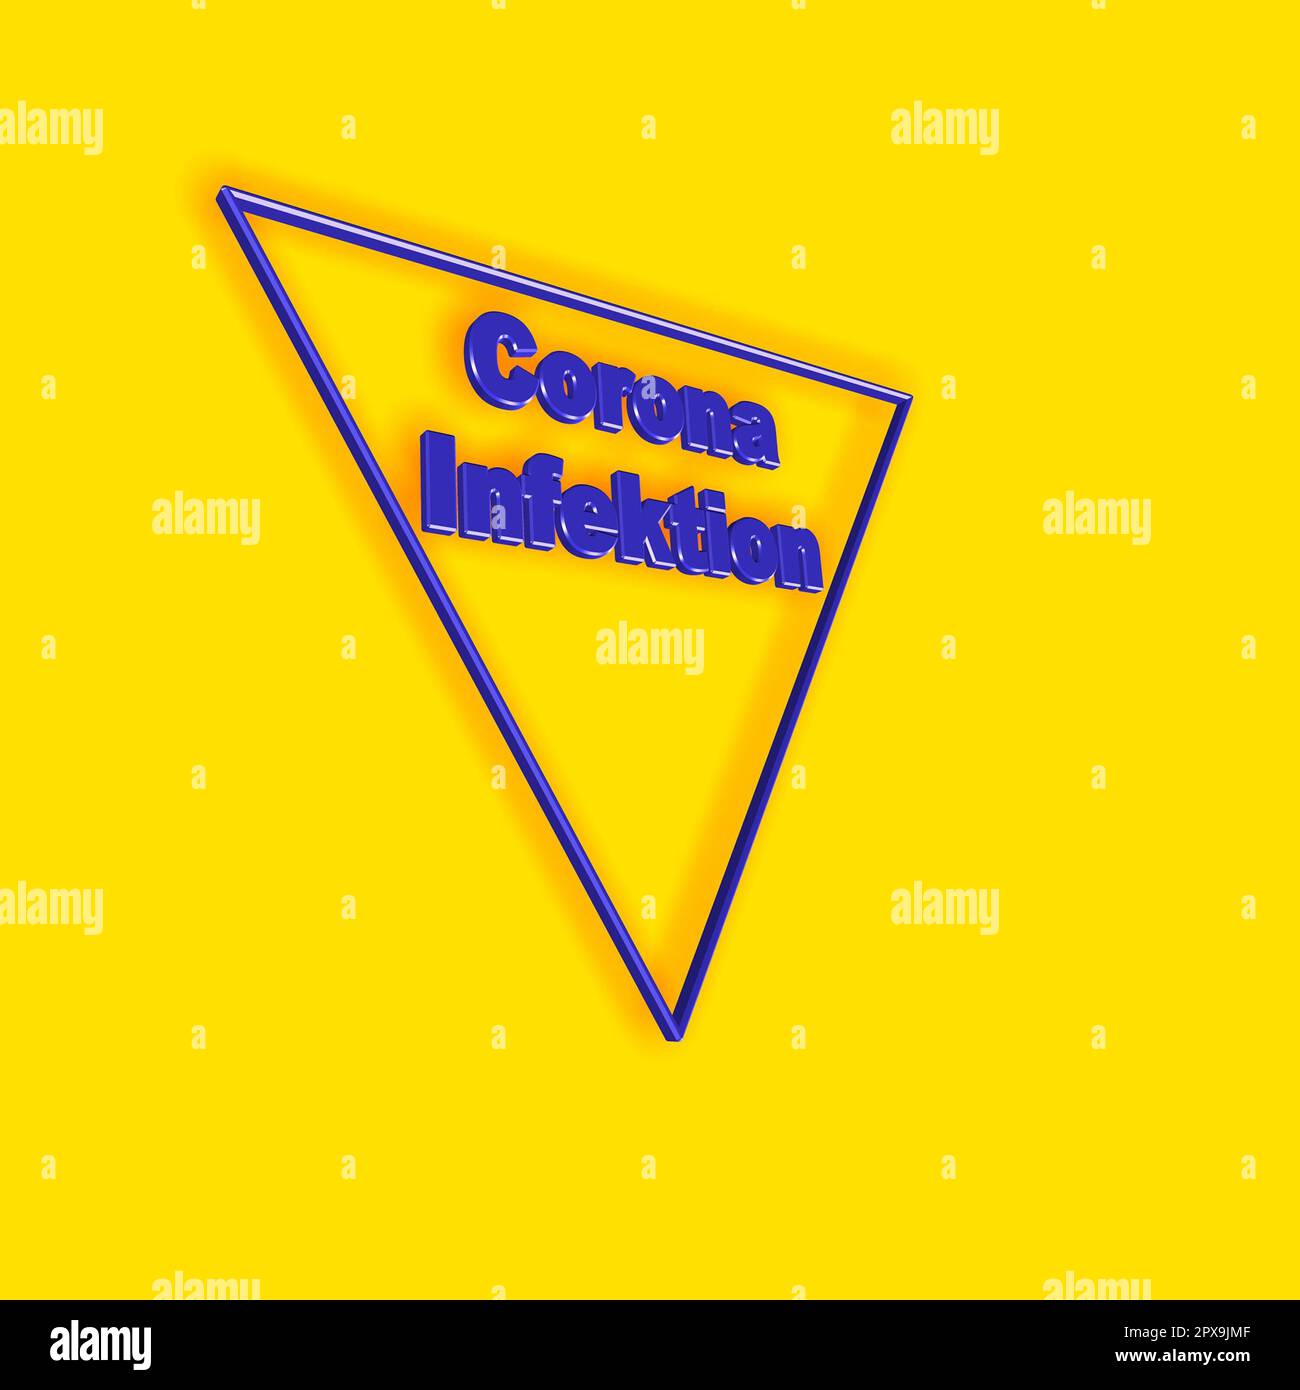 'Coronainfektion' = 'Corona infection' - word, lettering or text as a 3D illustration, 3D rendering, computer graphics Stock Photo